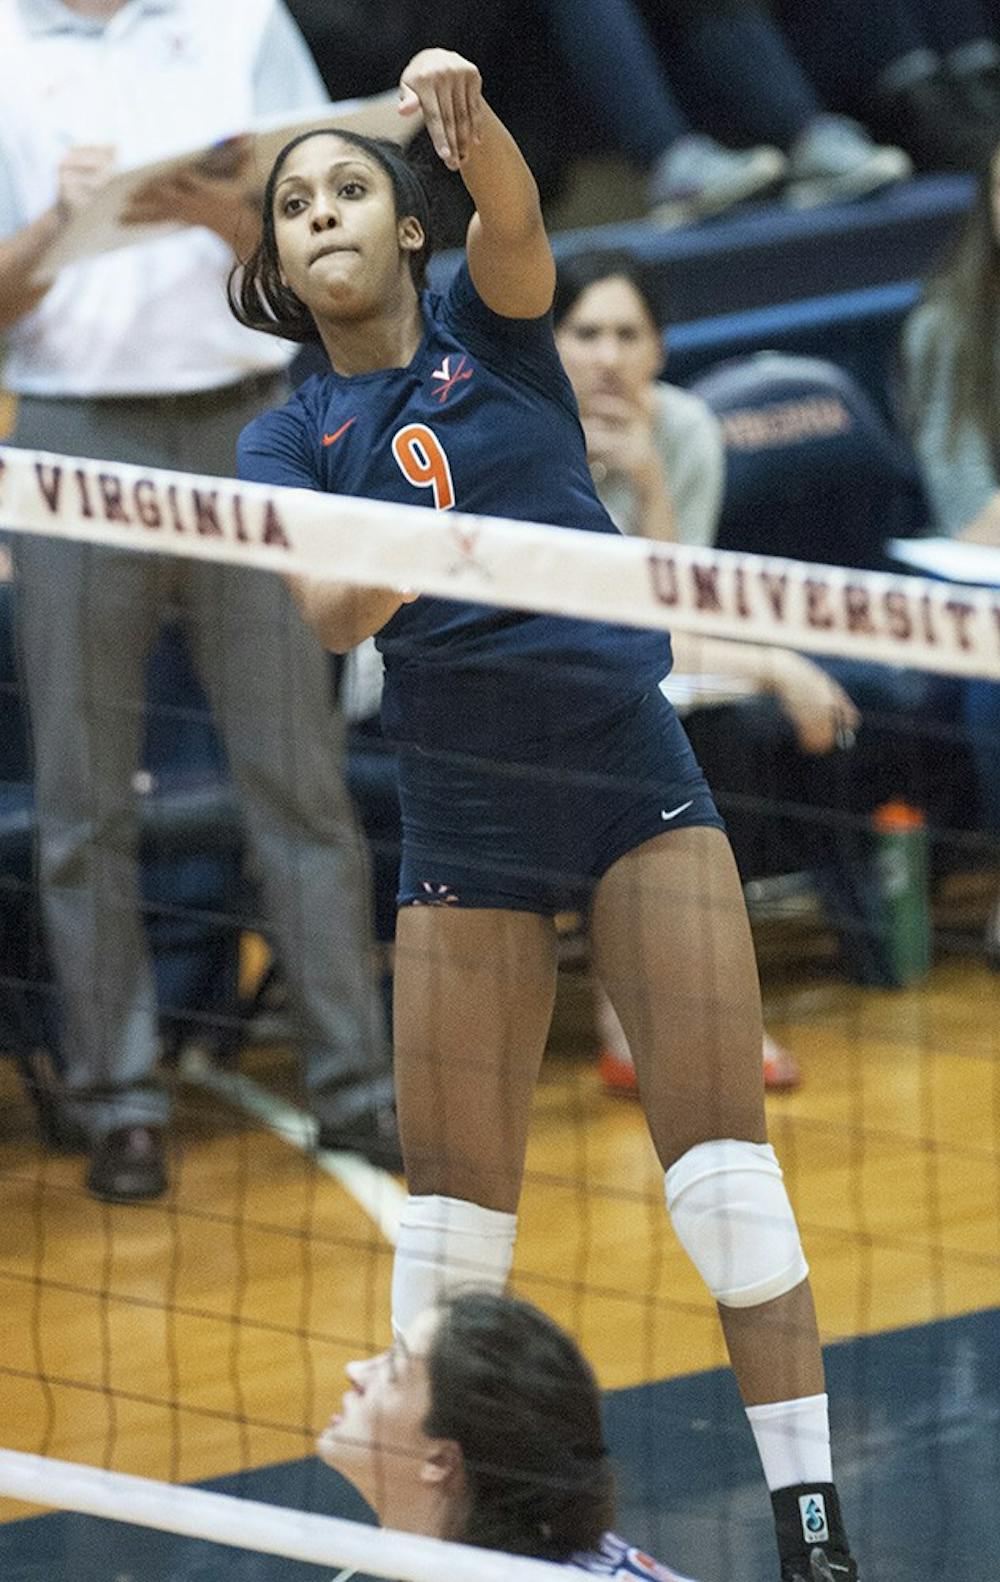 Senior outside hitter&nbsp;Jasmine Burton had 11 kills against Buffalo Friday. Virginia won its first two games before falling against Northwestern in the Cavalier Classic title game.